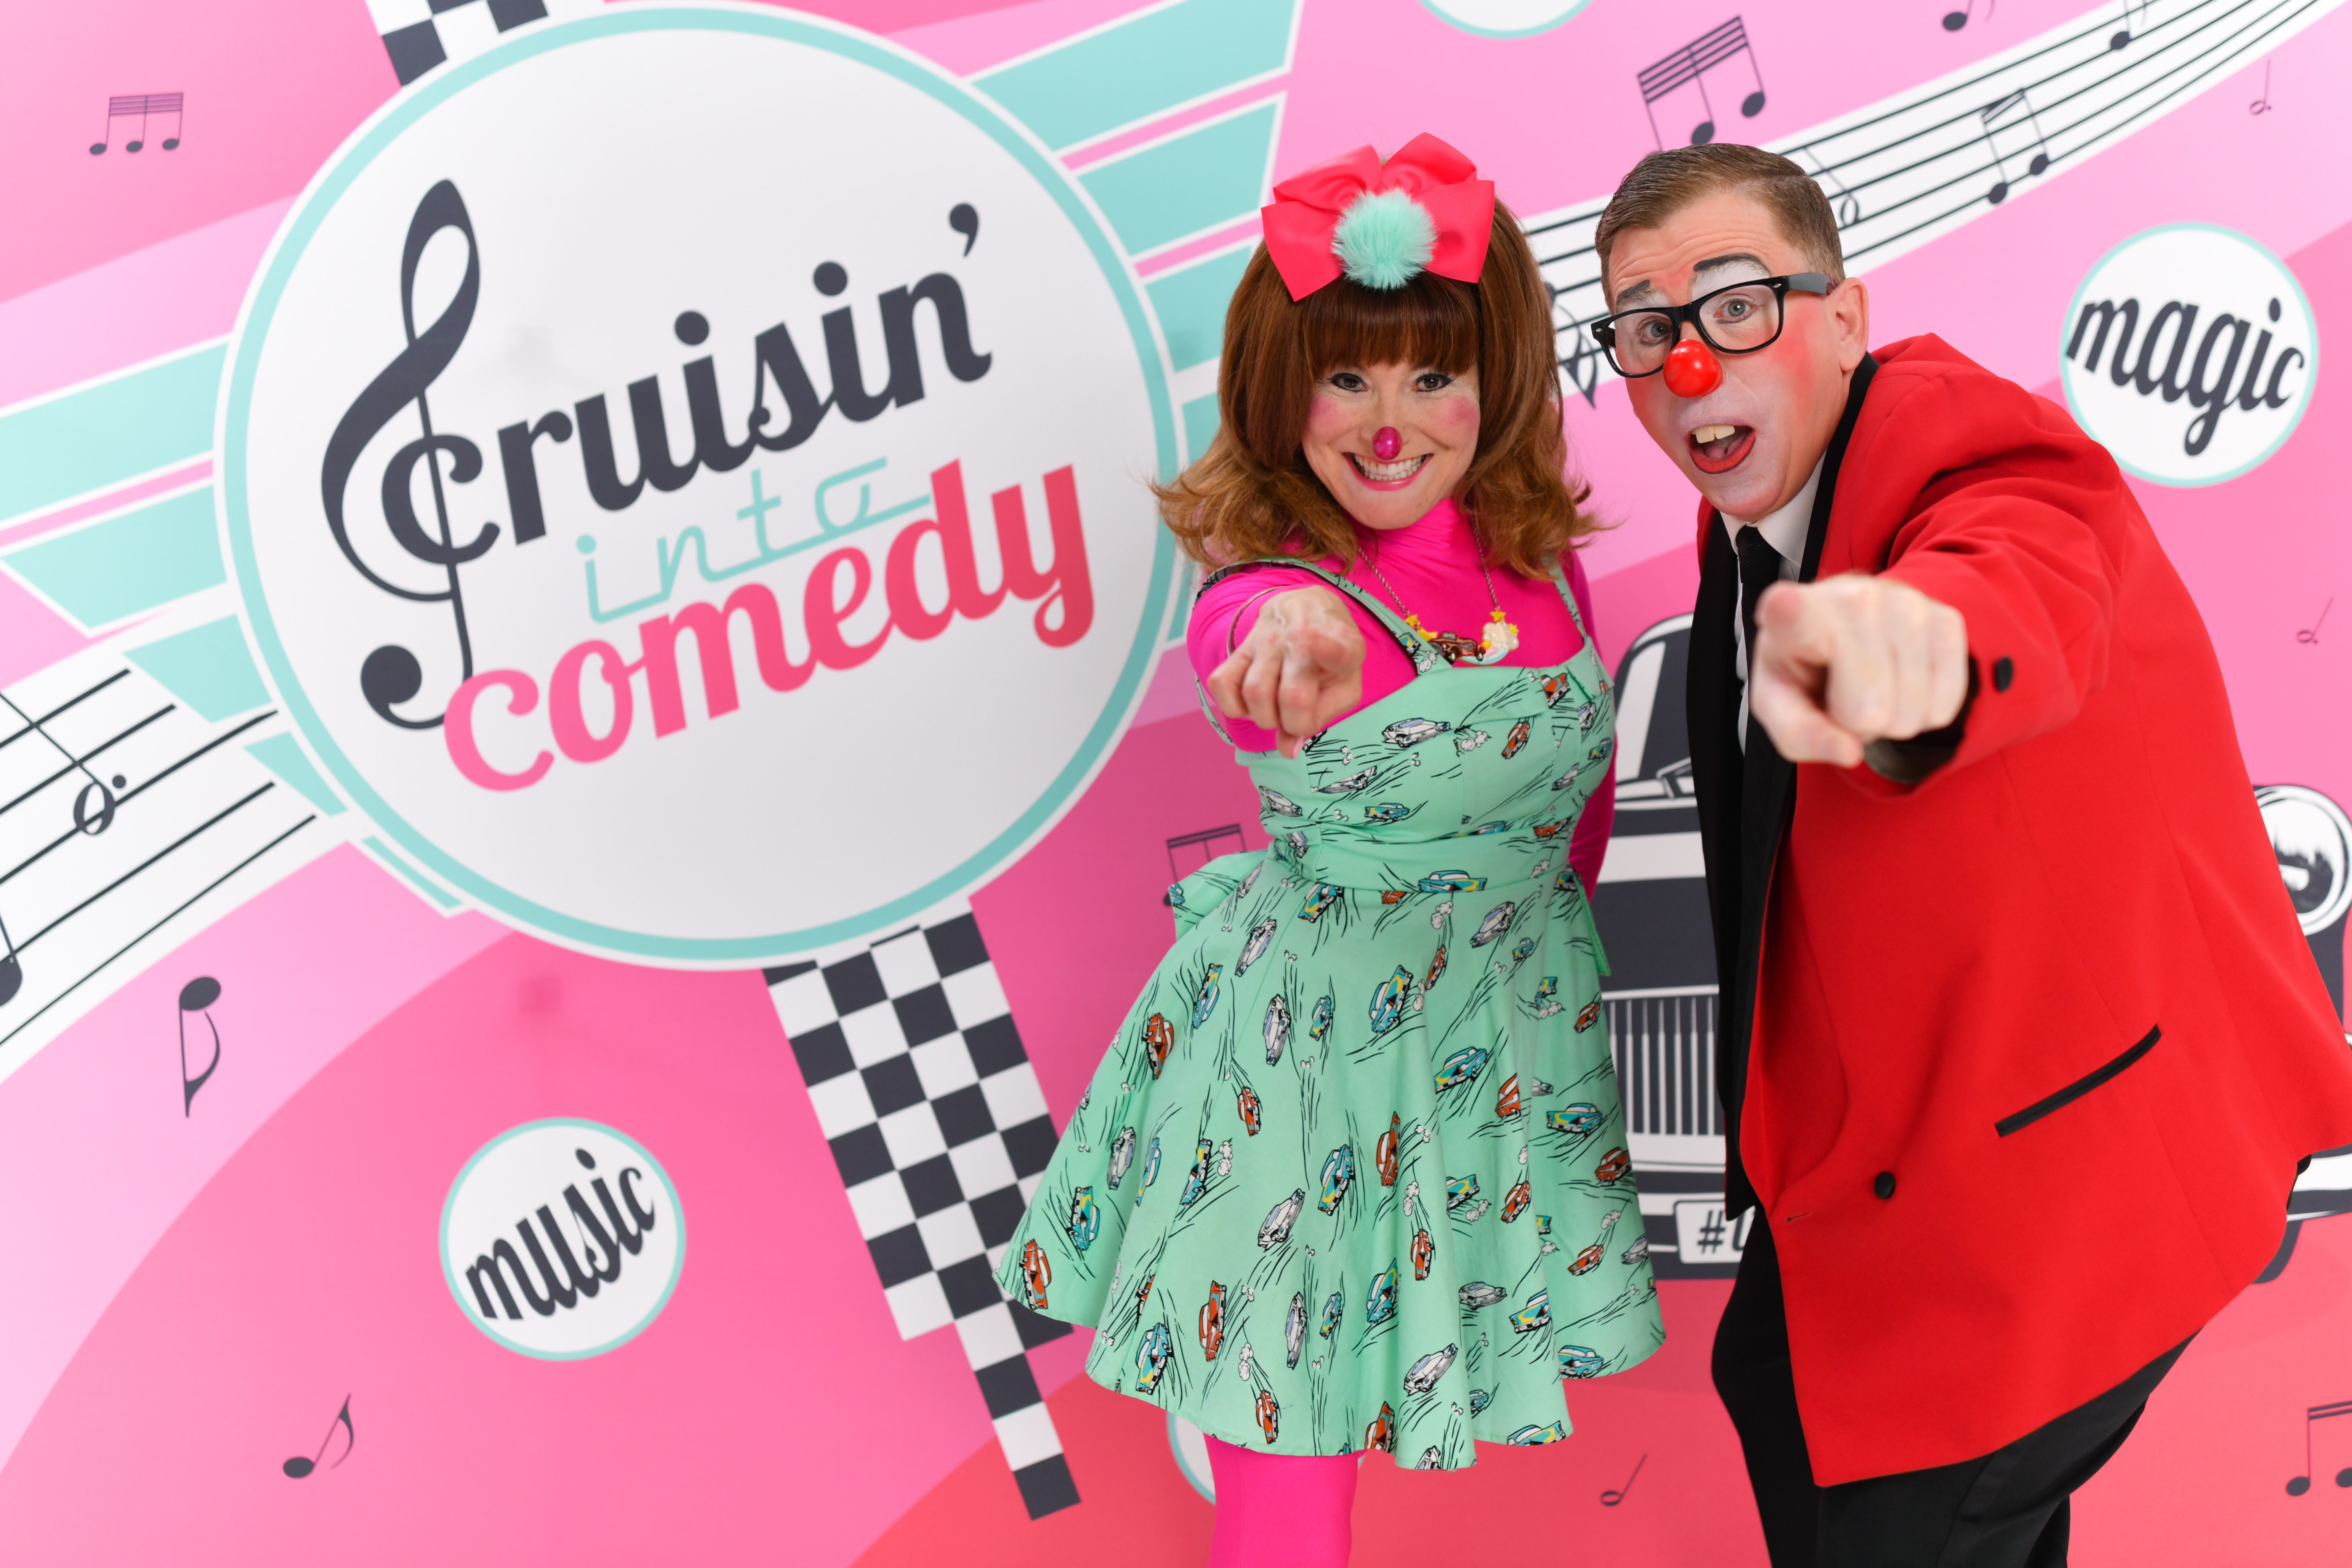 Woman and man dressed as clowns in front of a sign "Cruisin' Into Comedy".